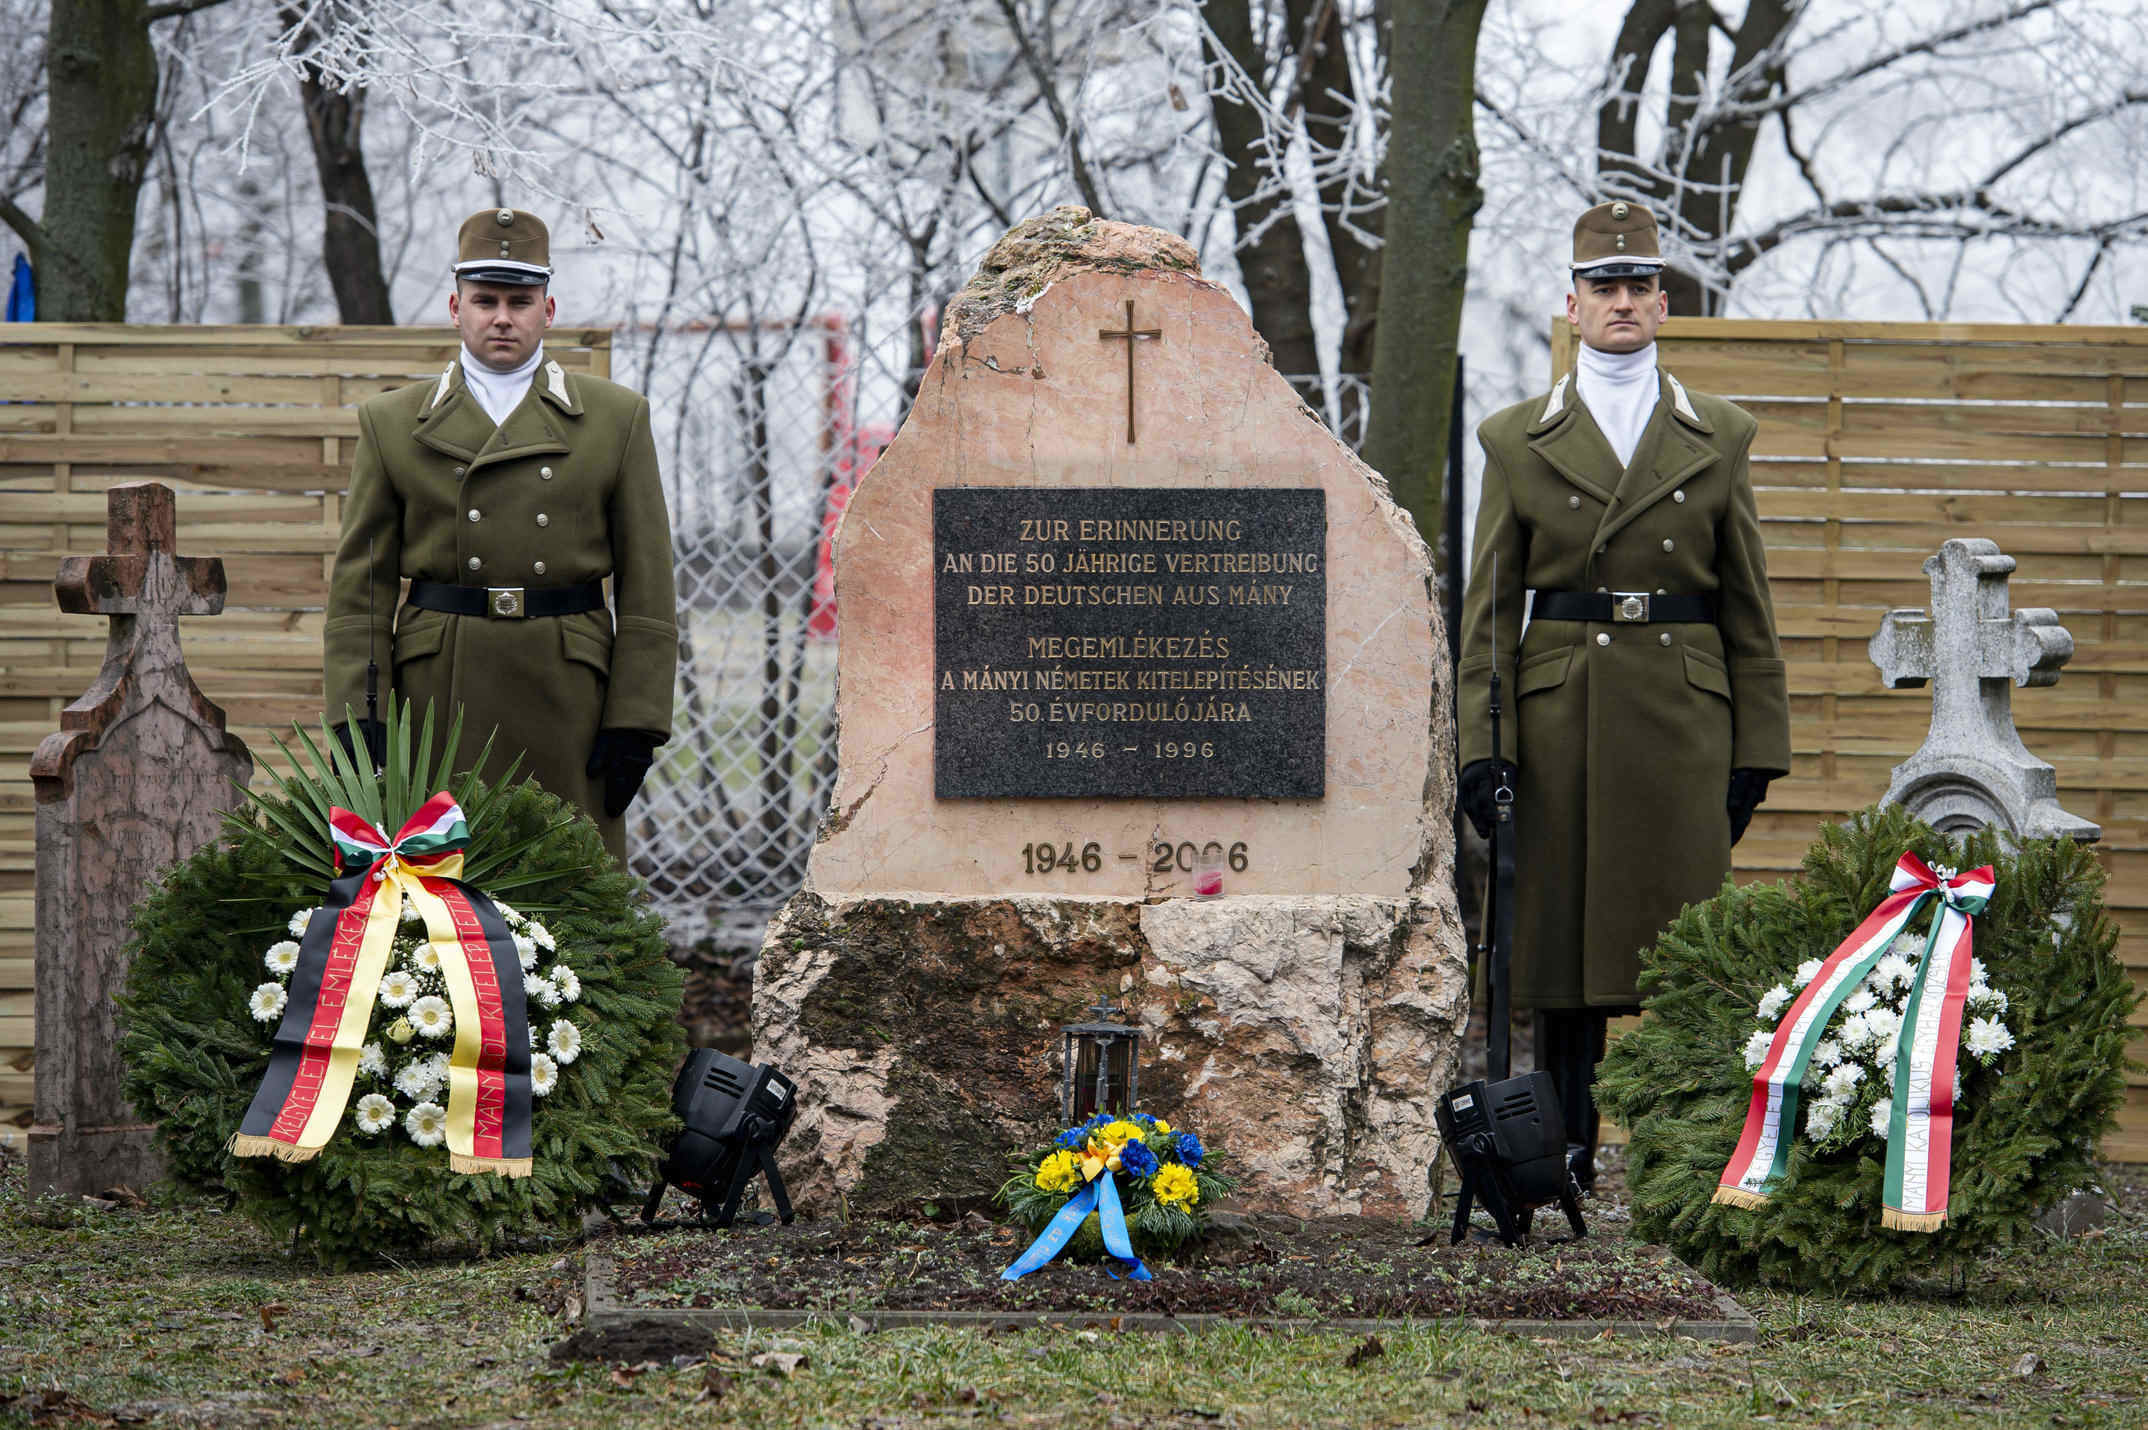 deported germans commemorated